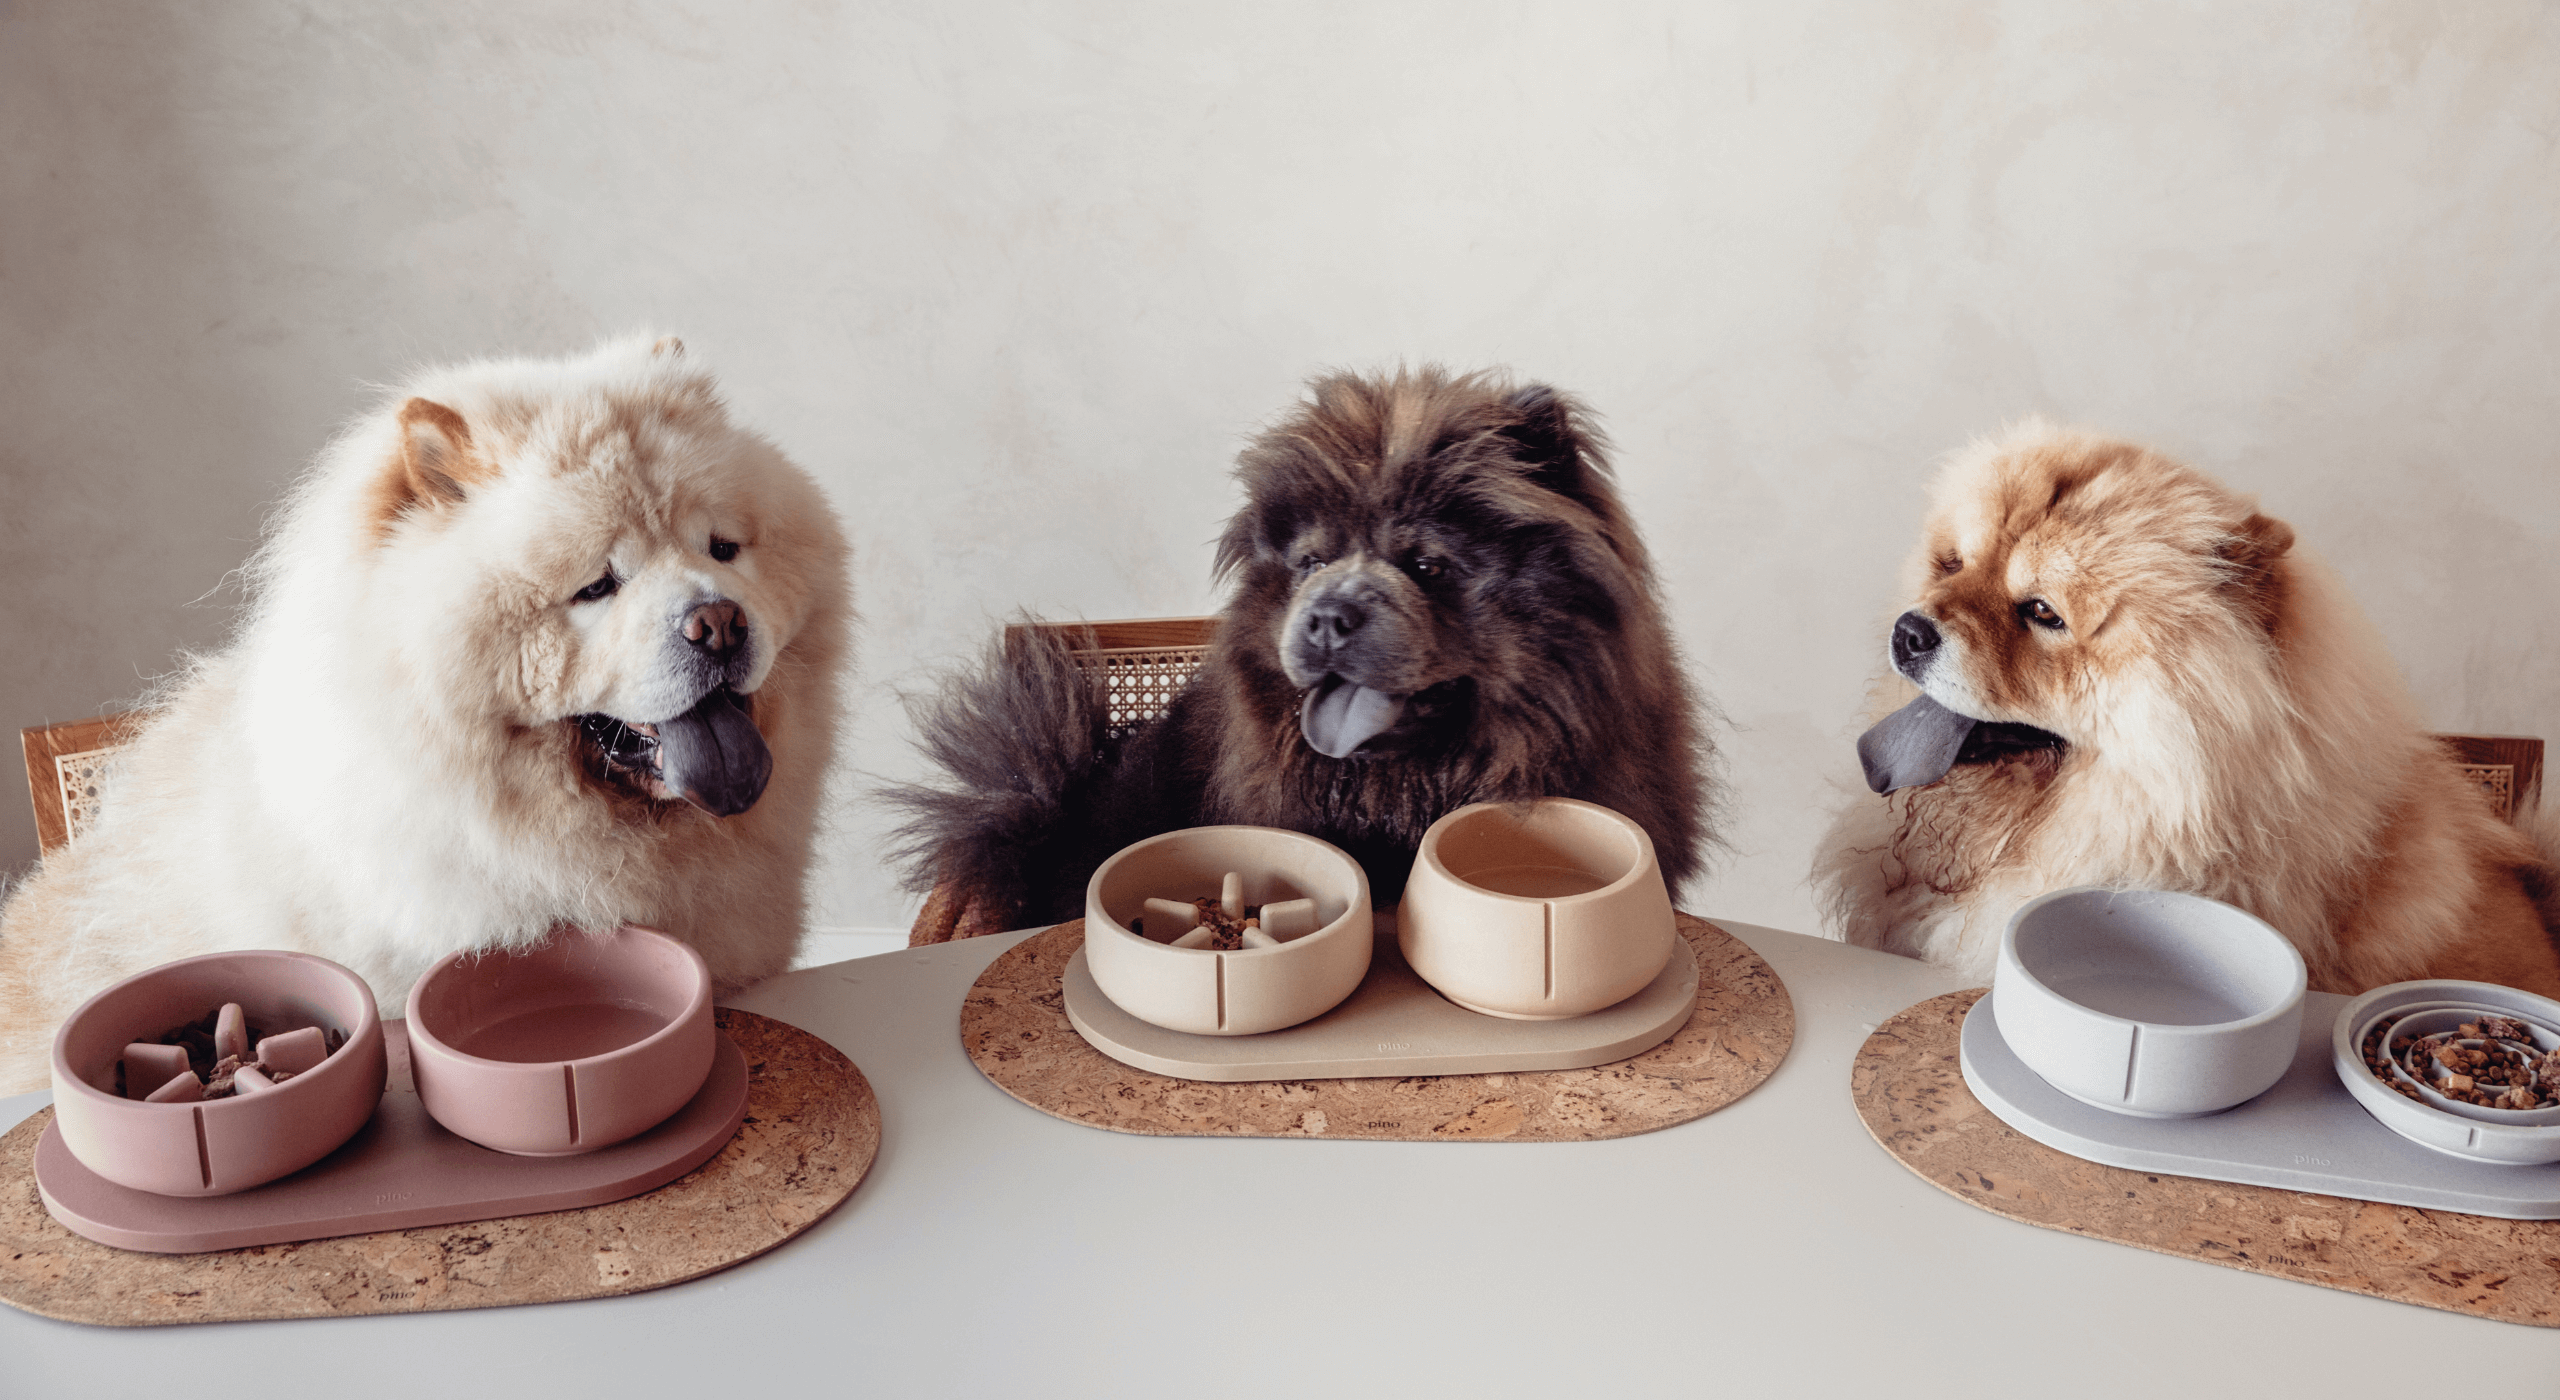 3 Chow chow's eating out of Pino bowls at a table